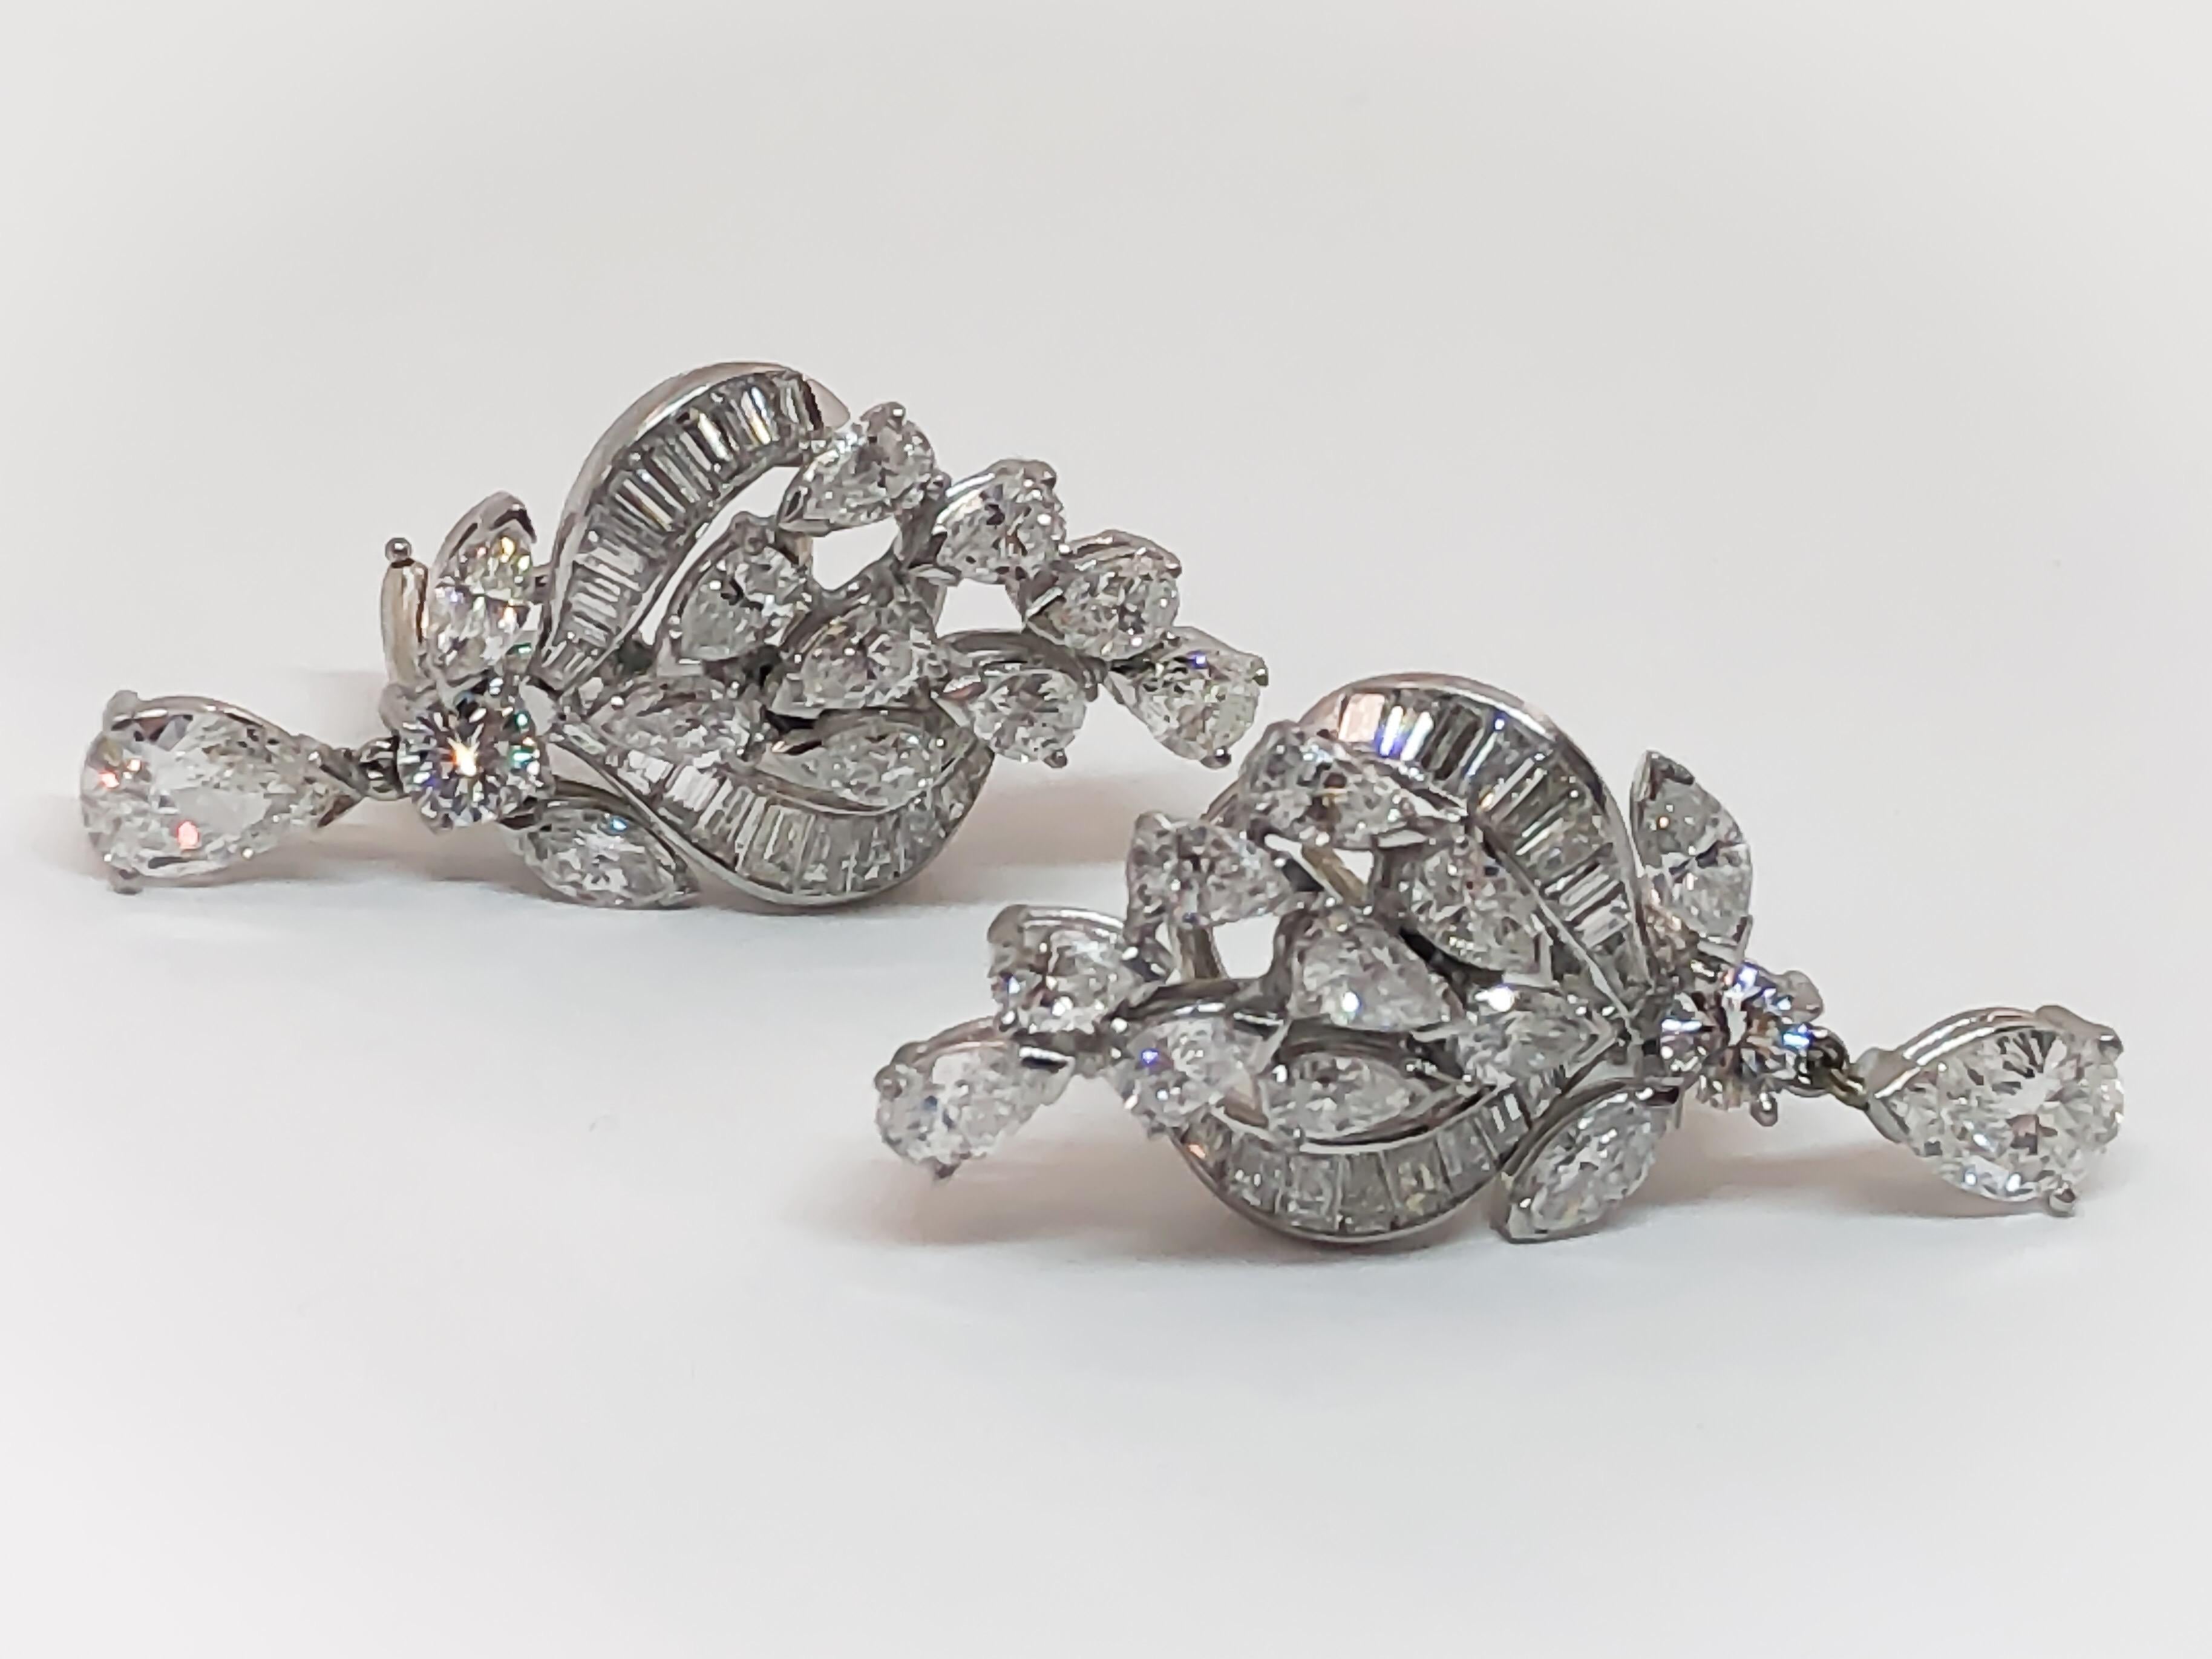 Very fine vintage cascading drop earrings designed in Platinum. These 